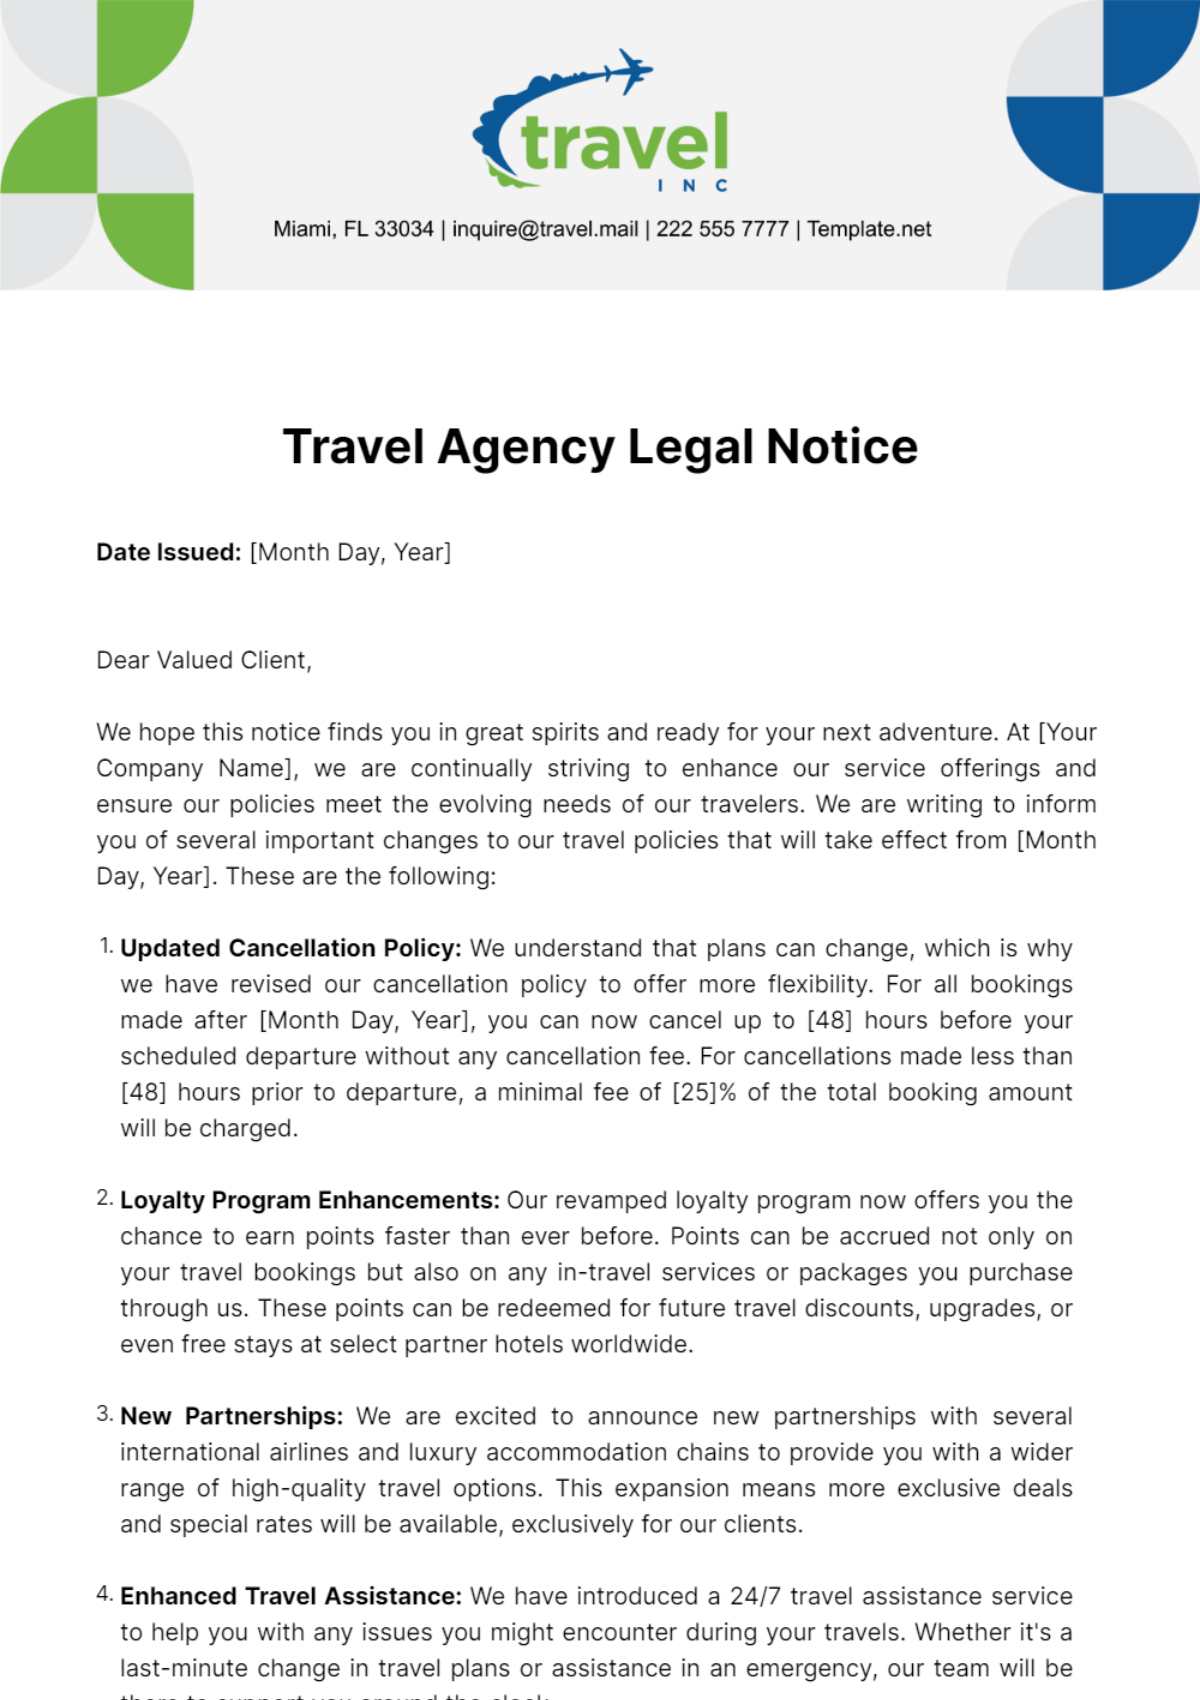 Travel Agency Legal Notice Template